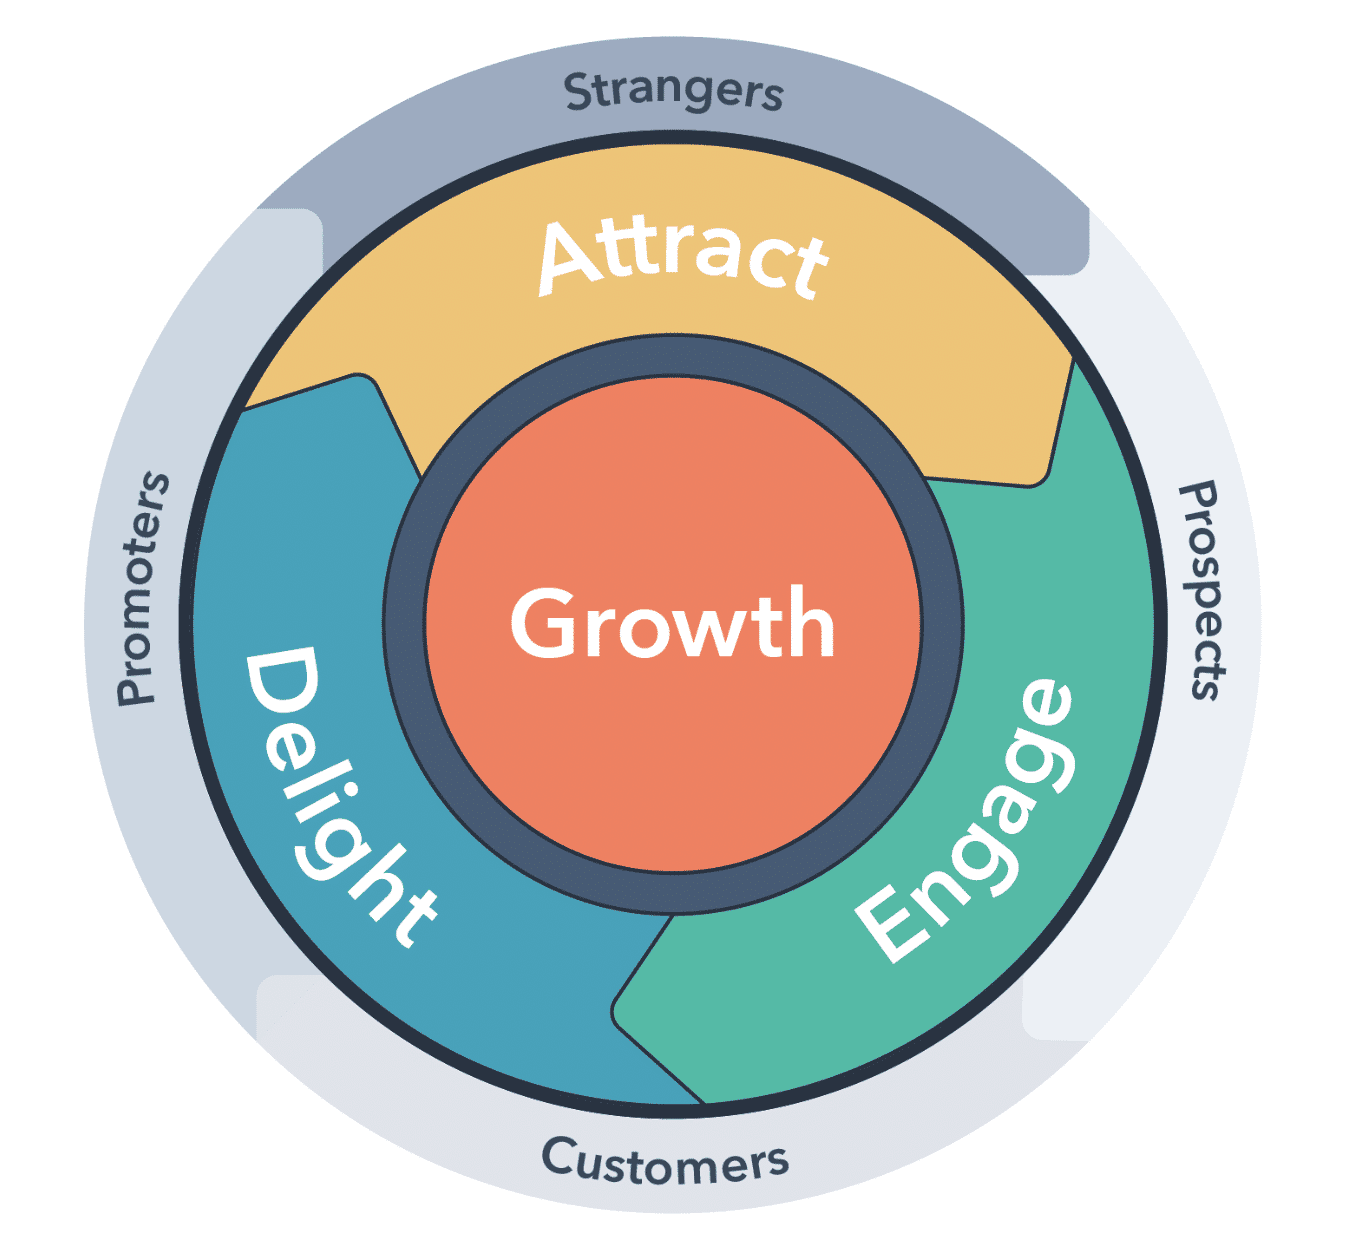 Inbound marketing flywheel showing different marketing tools in the attract, engage, and delight stages